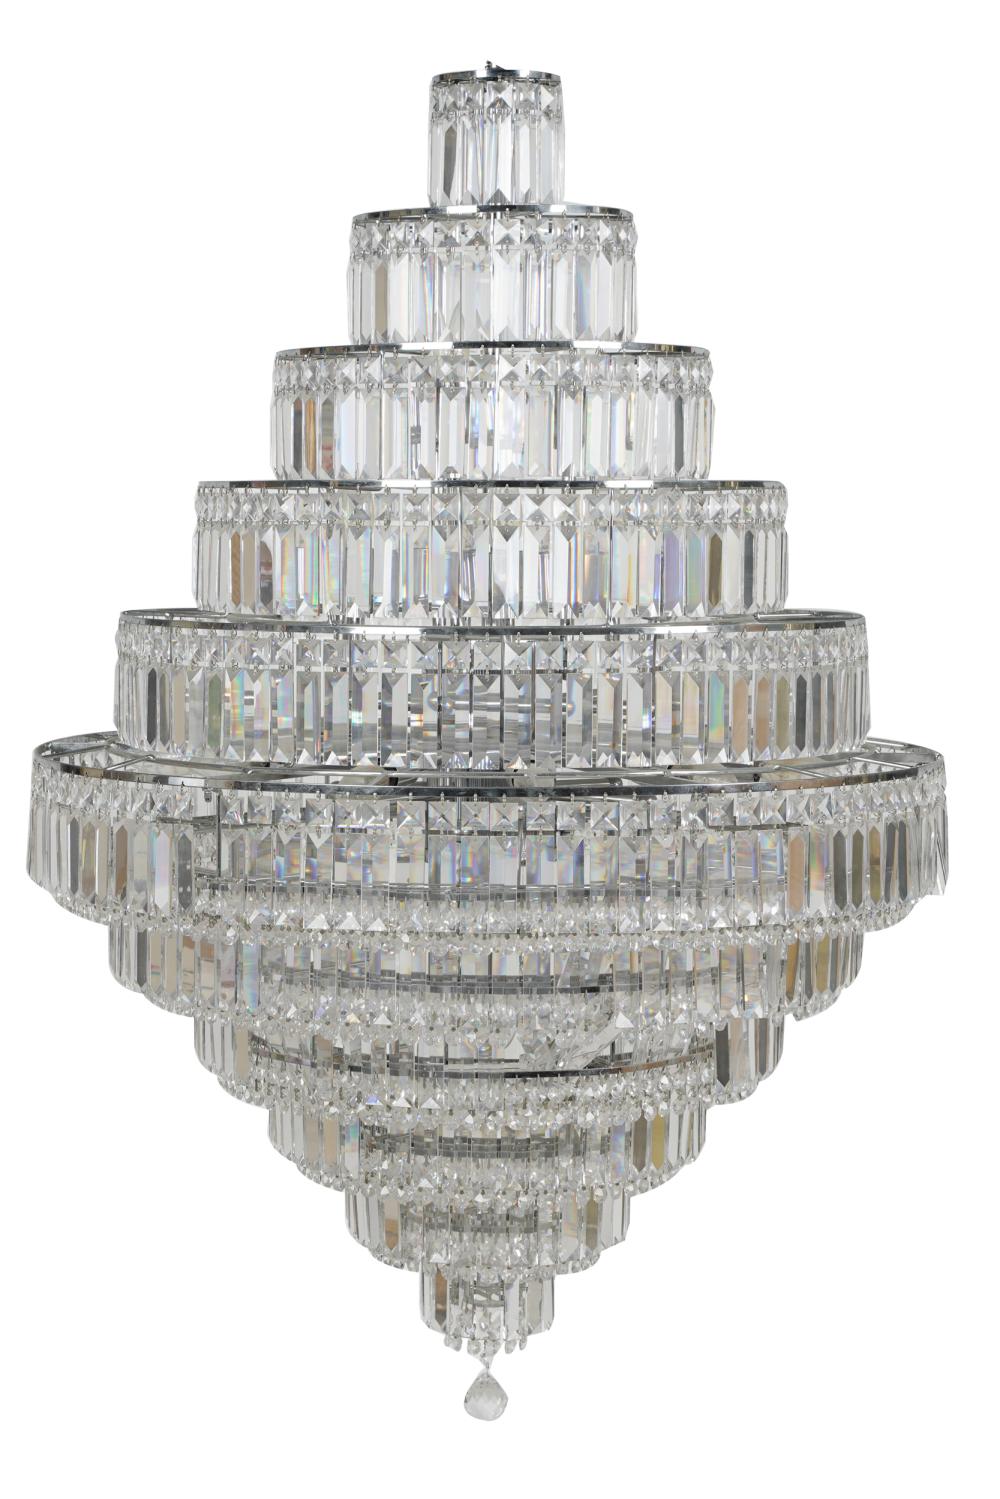 DROP CRYSTAL CHANDELIERwith eleven